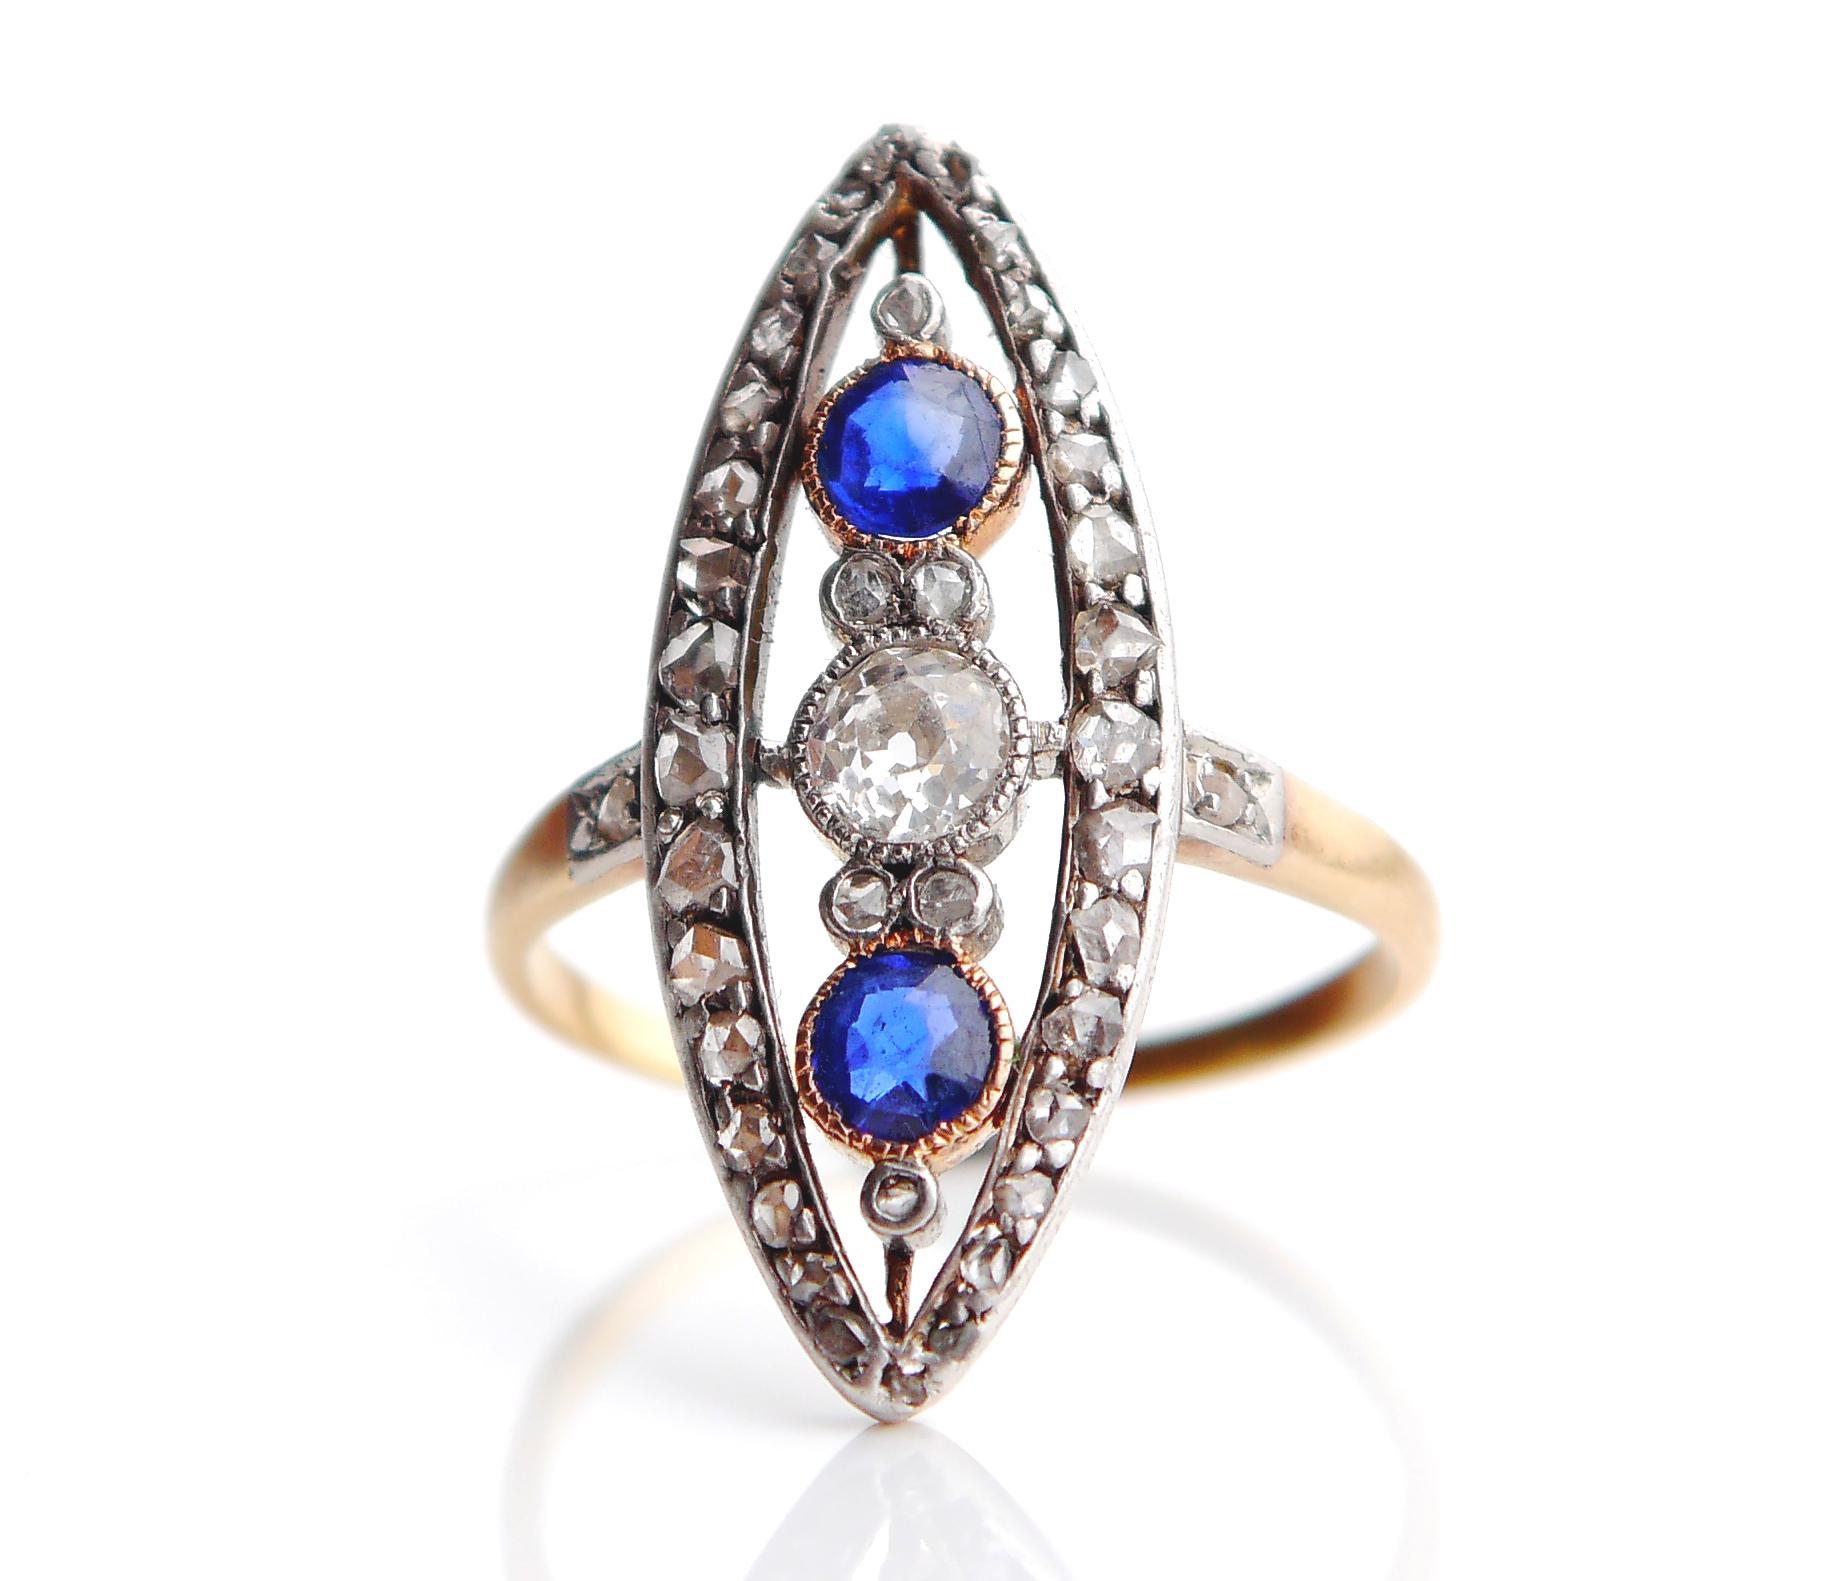 This old ring has navette or boat shaped crown with White Gold / or Platinum top on solid 18K Green Gold band set with natural Diamonds and Blue Sapphires. European made, dates to ca. early XX century.

Crown with stones measures 27 mm x 11 mm 3 mm